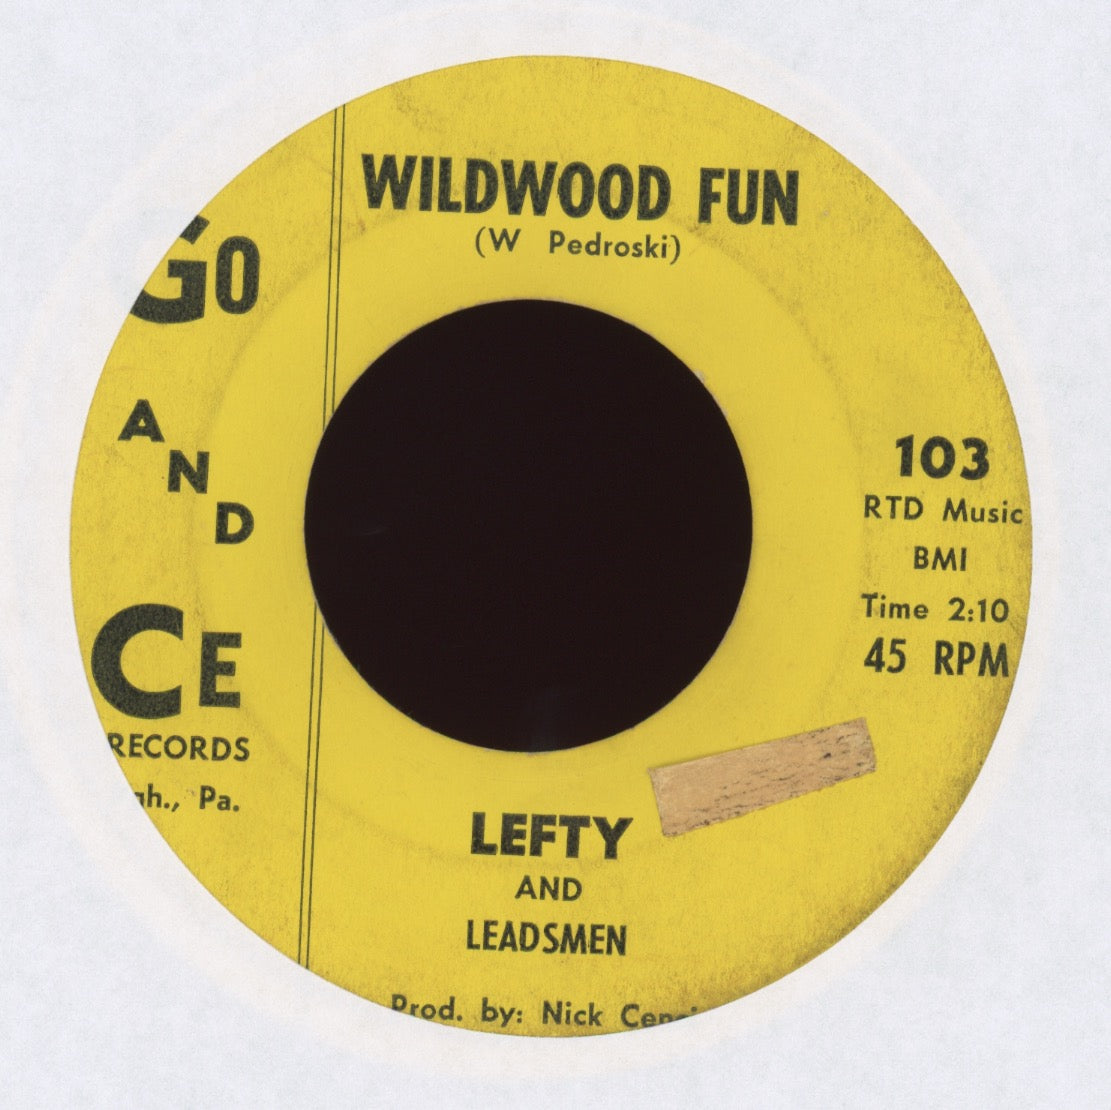 Lefty & The Leadsmen - Wildwood Fun on Go and Ce